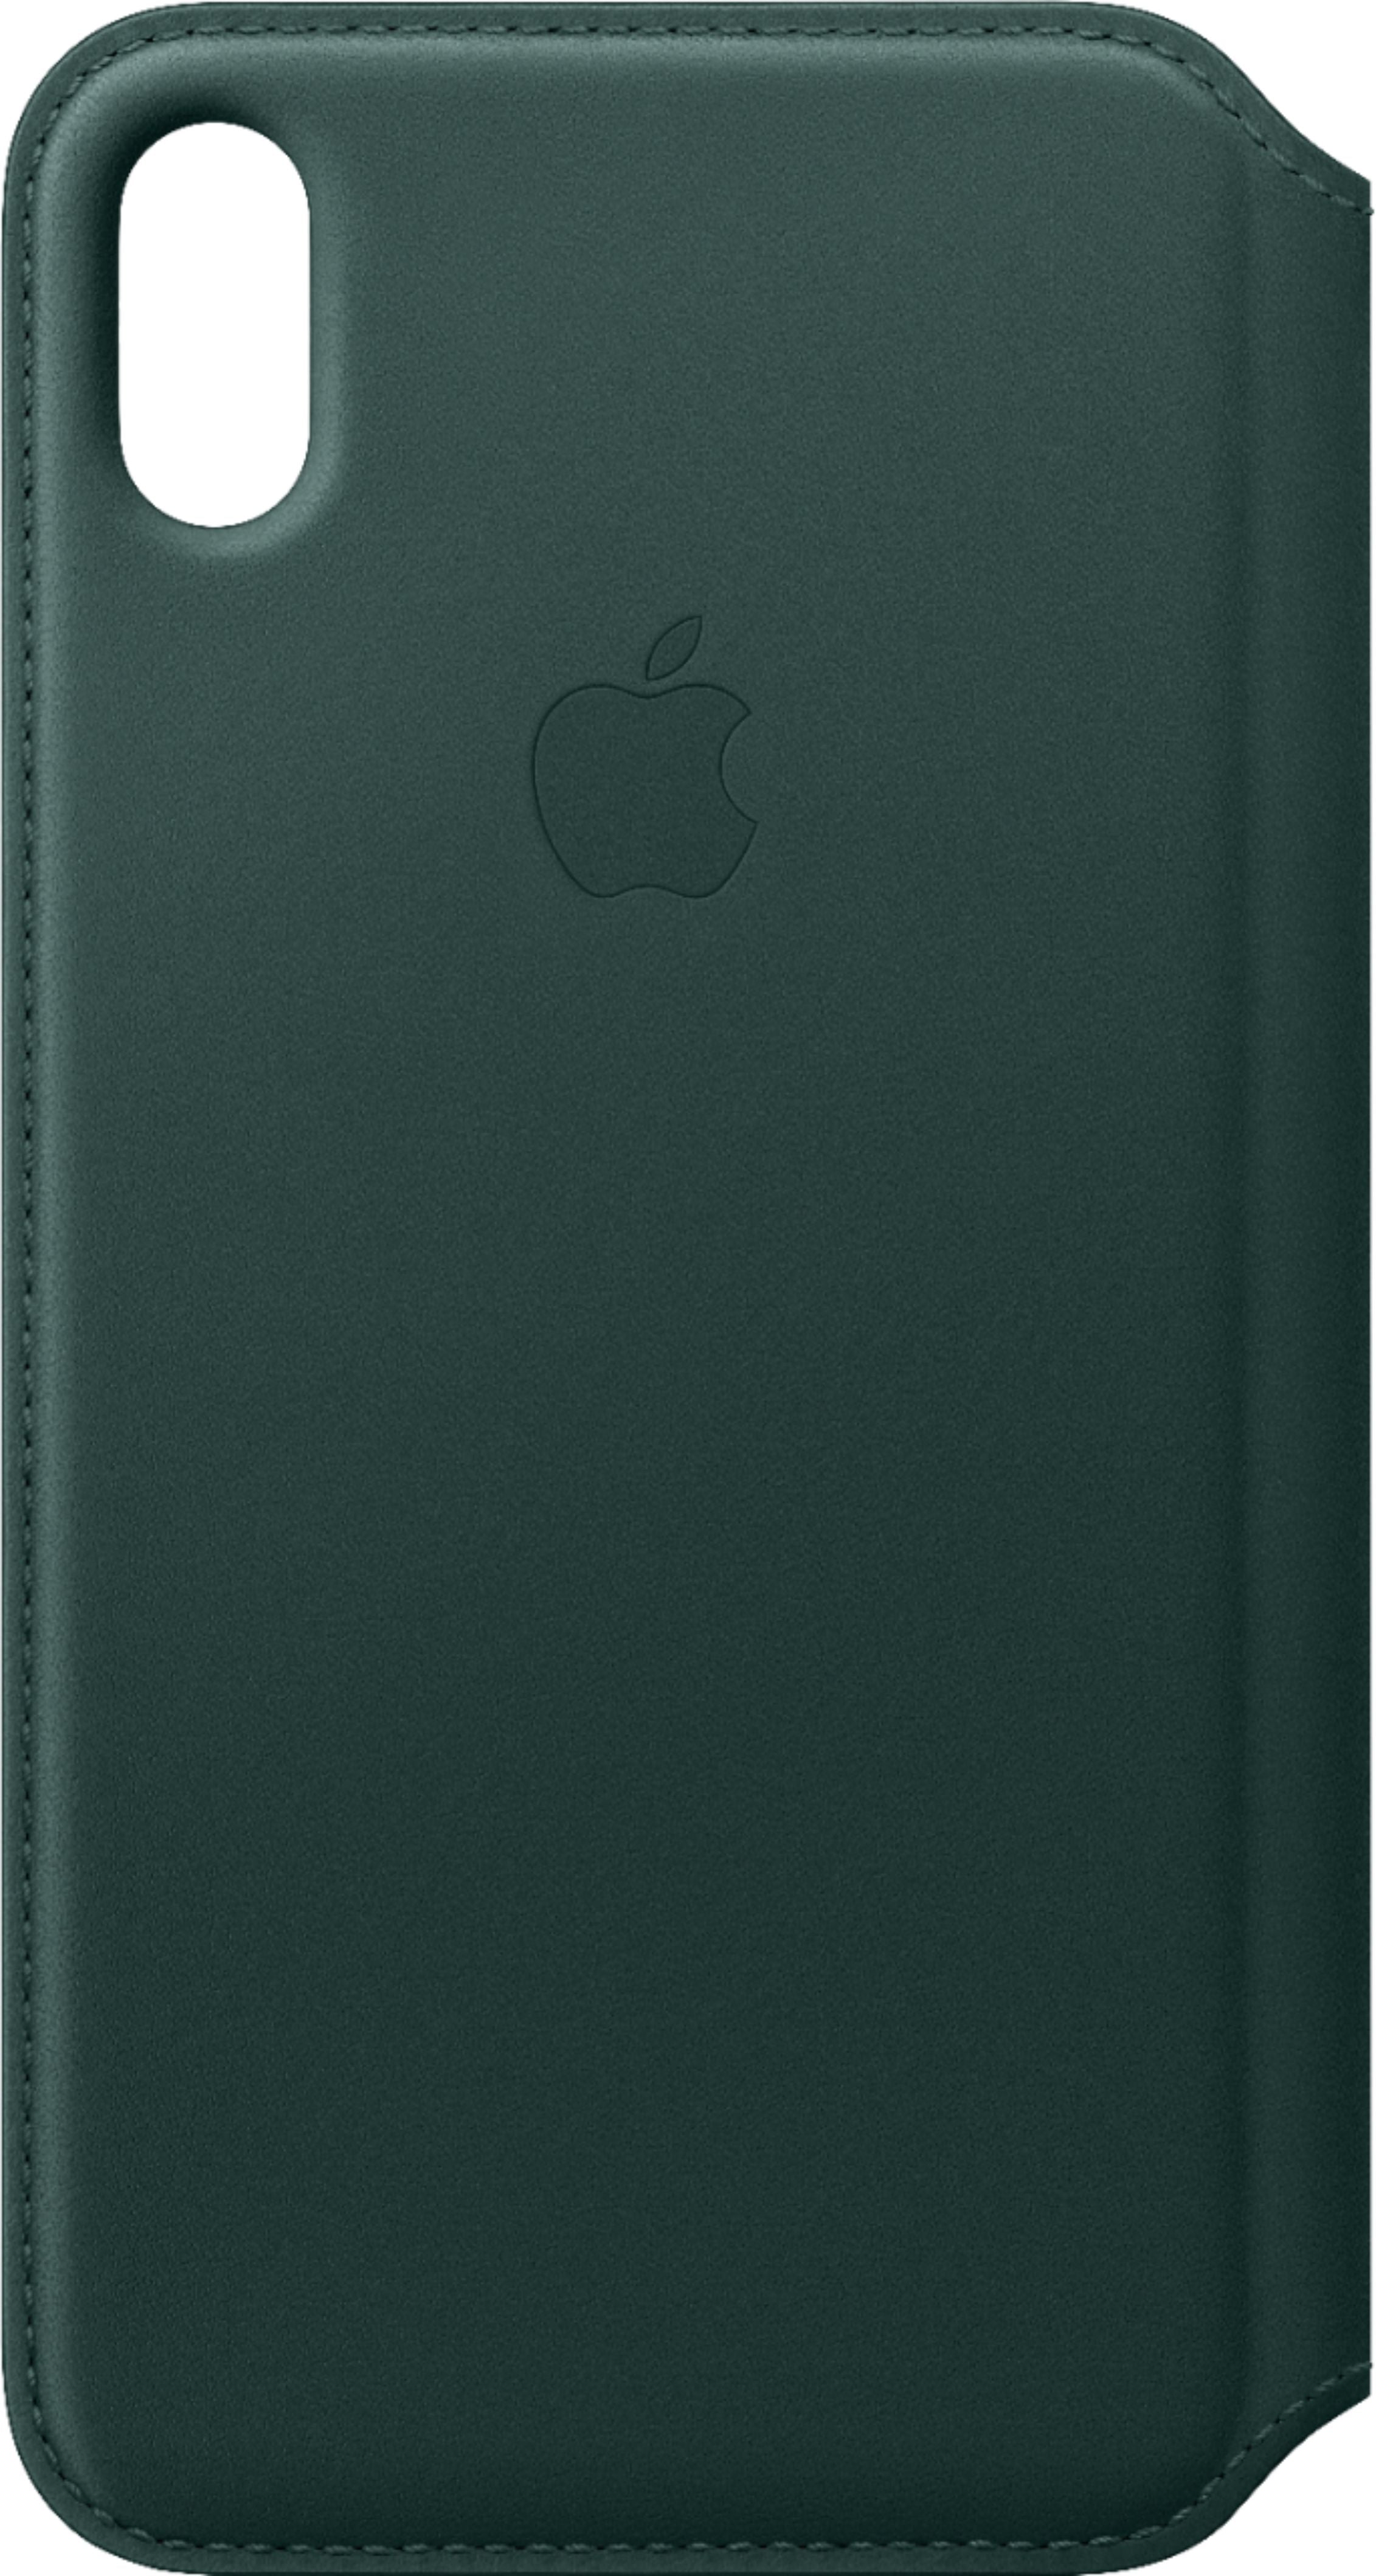 Apple Leather Folio (for iPhone Xs Max) - Forest Green